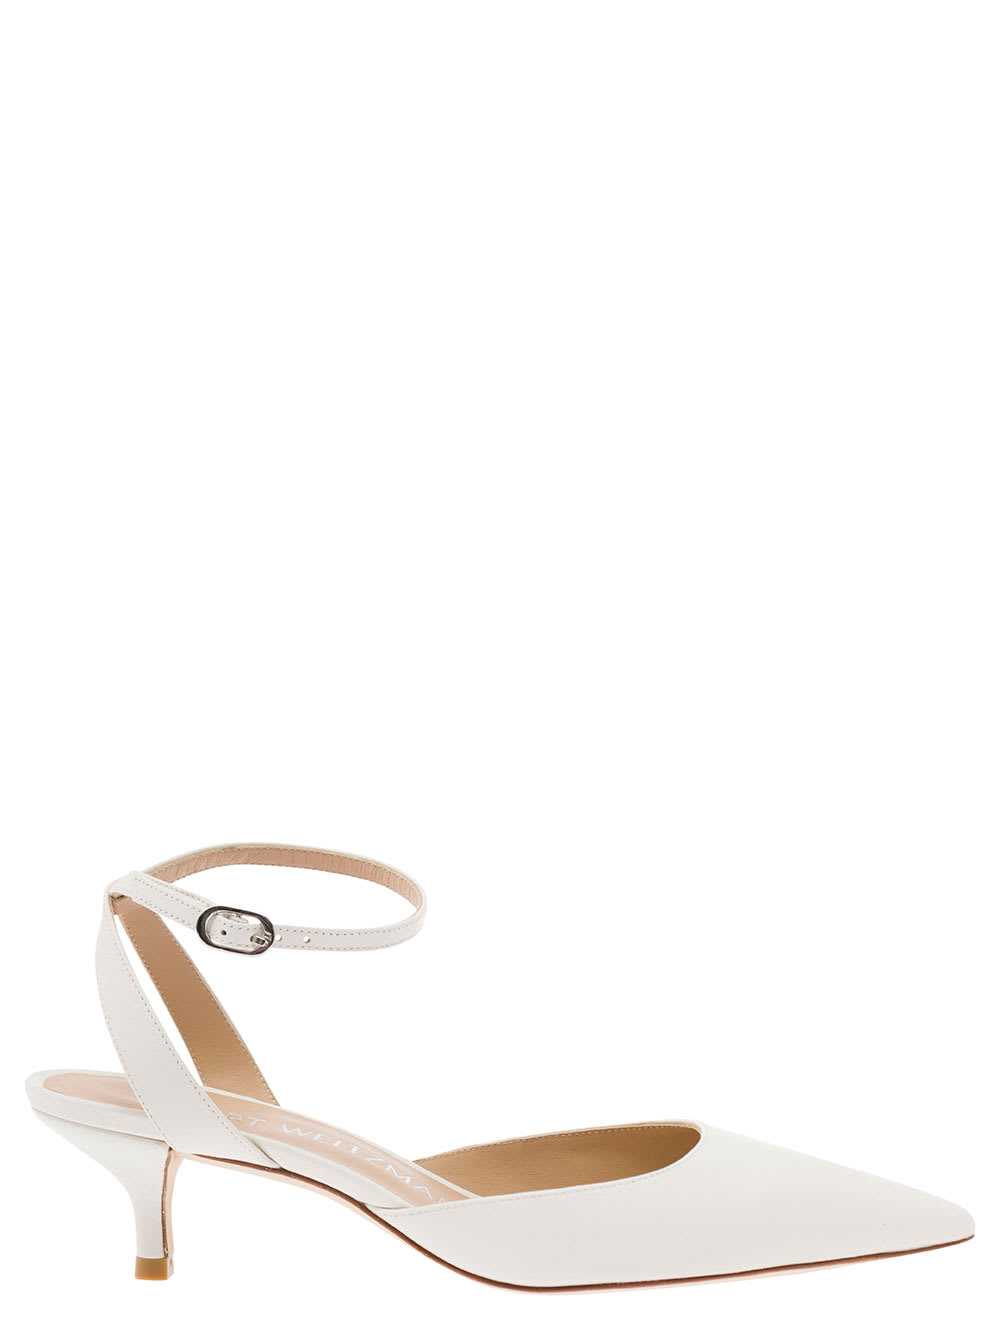 STUART WEITZMAN BARELYTHERE WHITE PUMPS WITH ANKLE STRAP IN SMOOTH LEATHER WOMAN